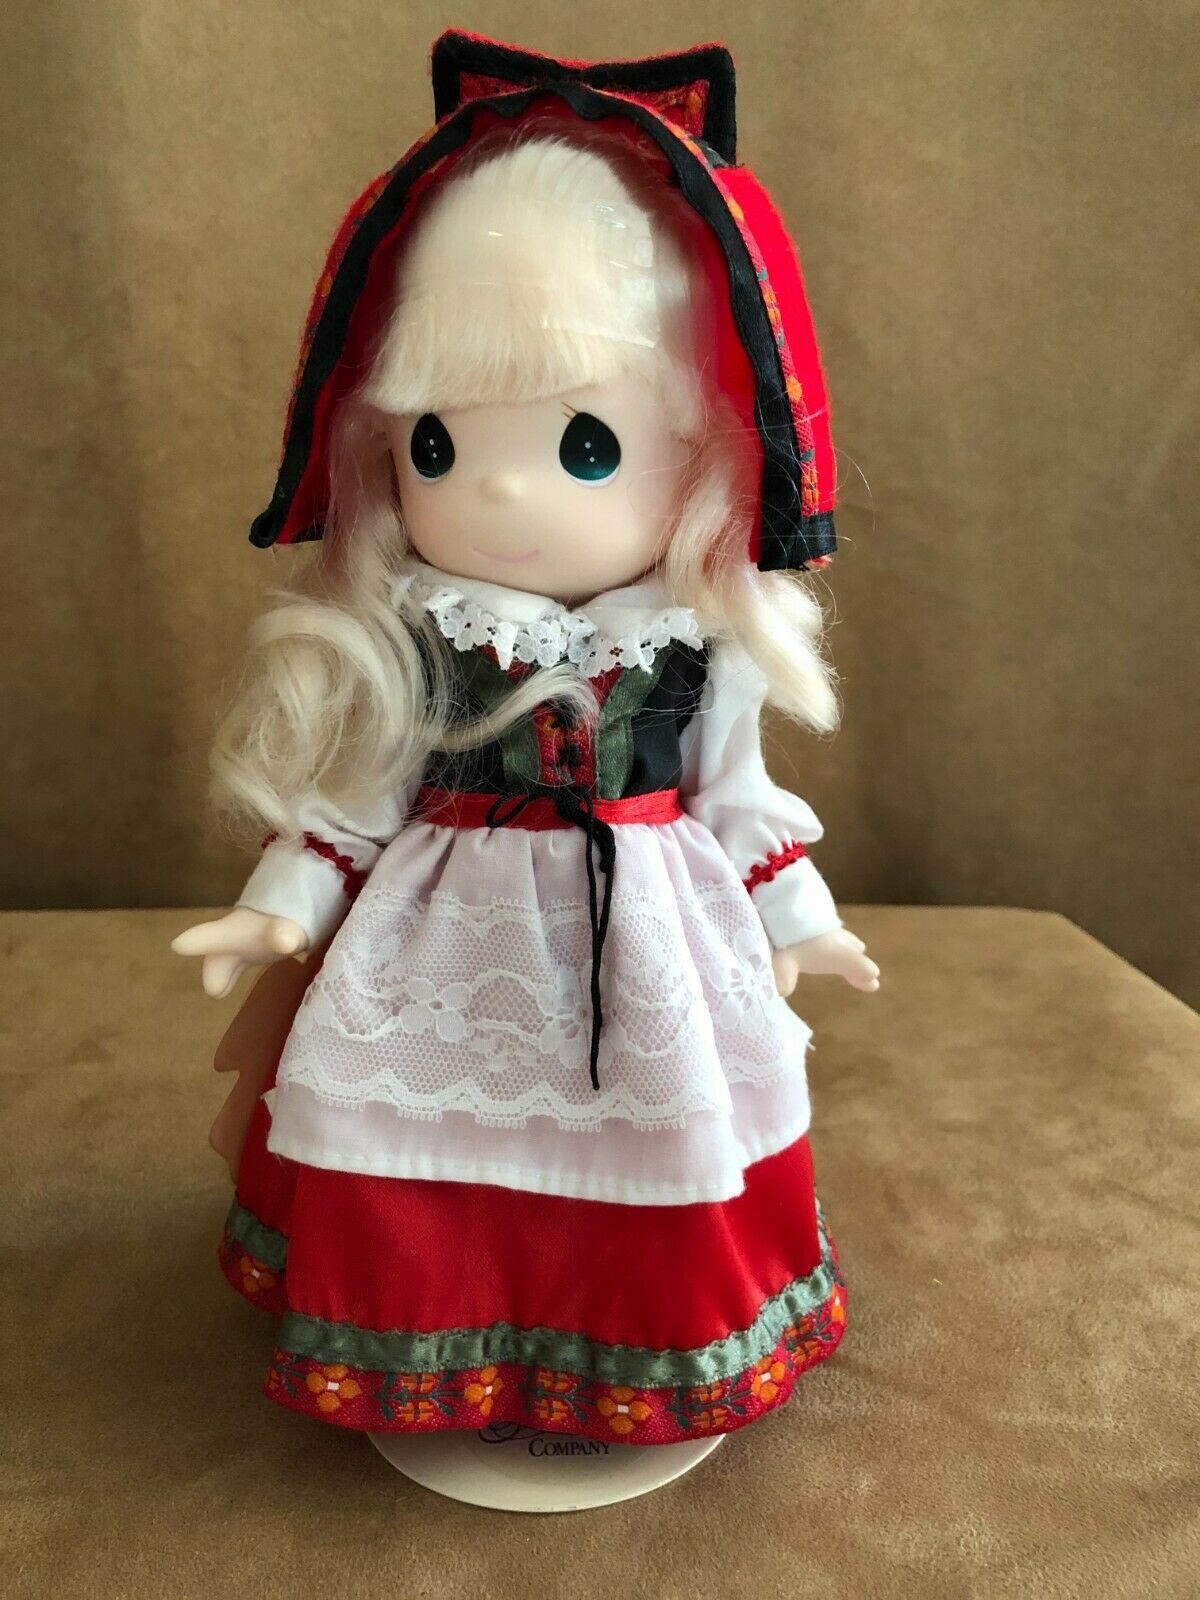 Ollie Children Of The World Precious Moments Doll 9" From Norway Little Girl